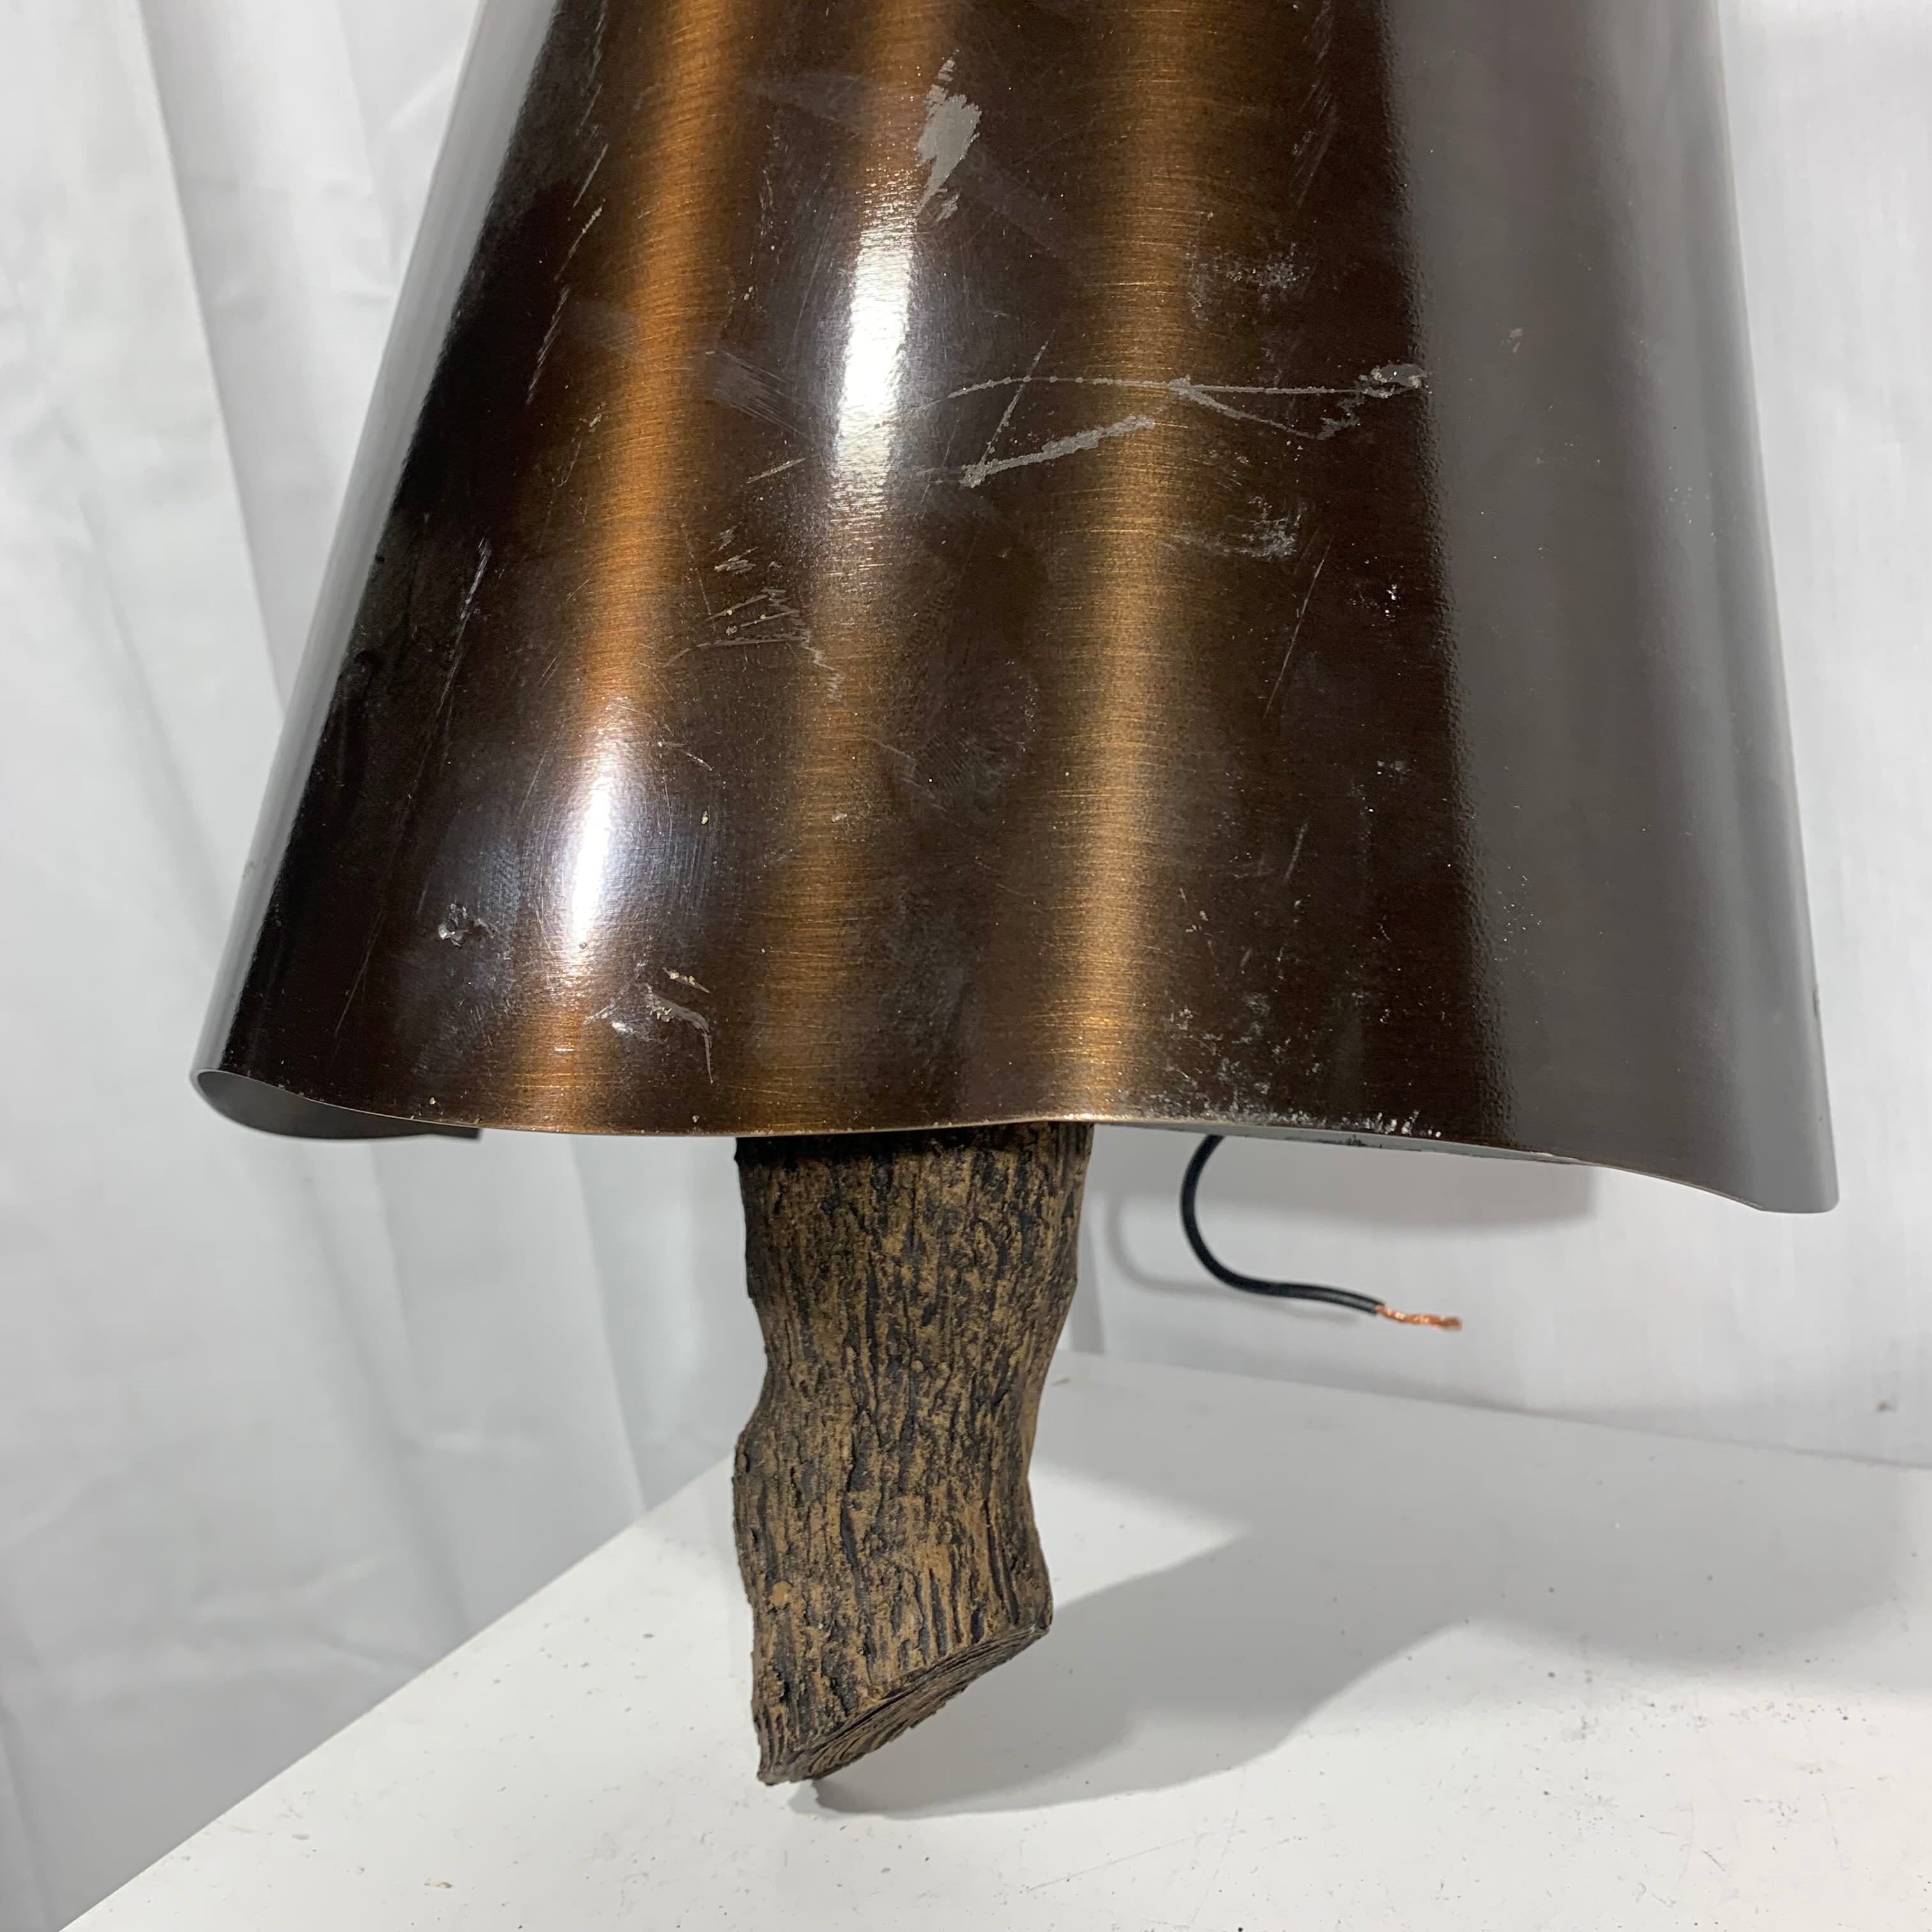 9.25"x 16" Louis Baldinger and Sons Wood Accent with Metal Shade Wall Sconce